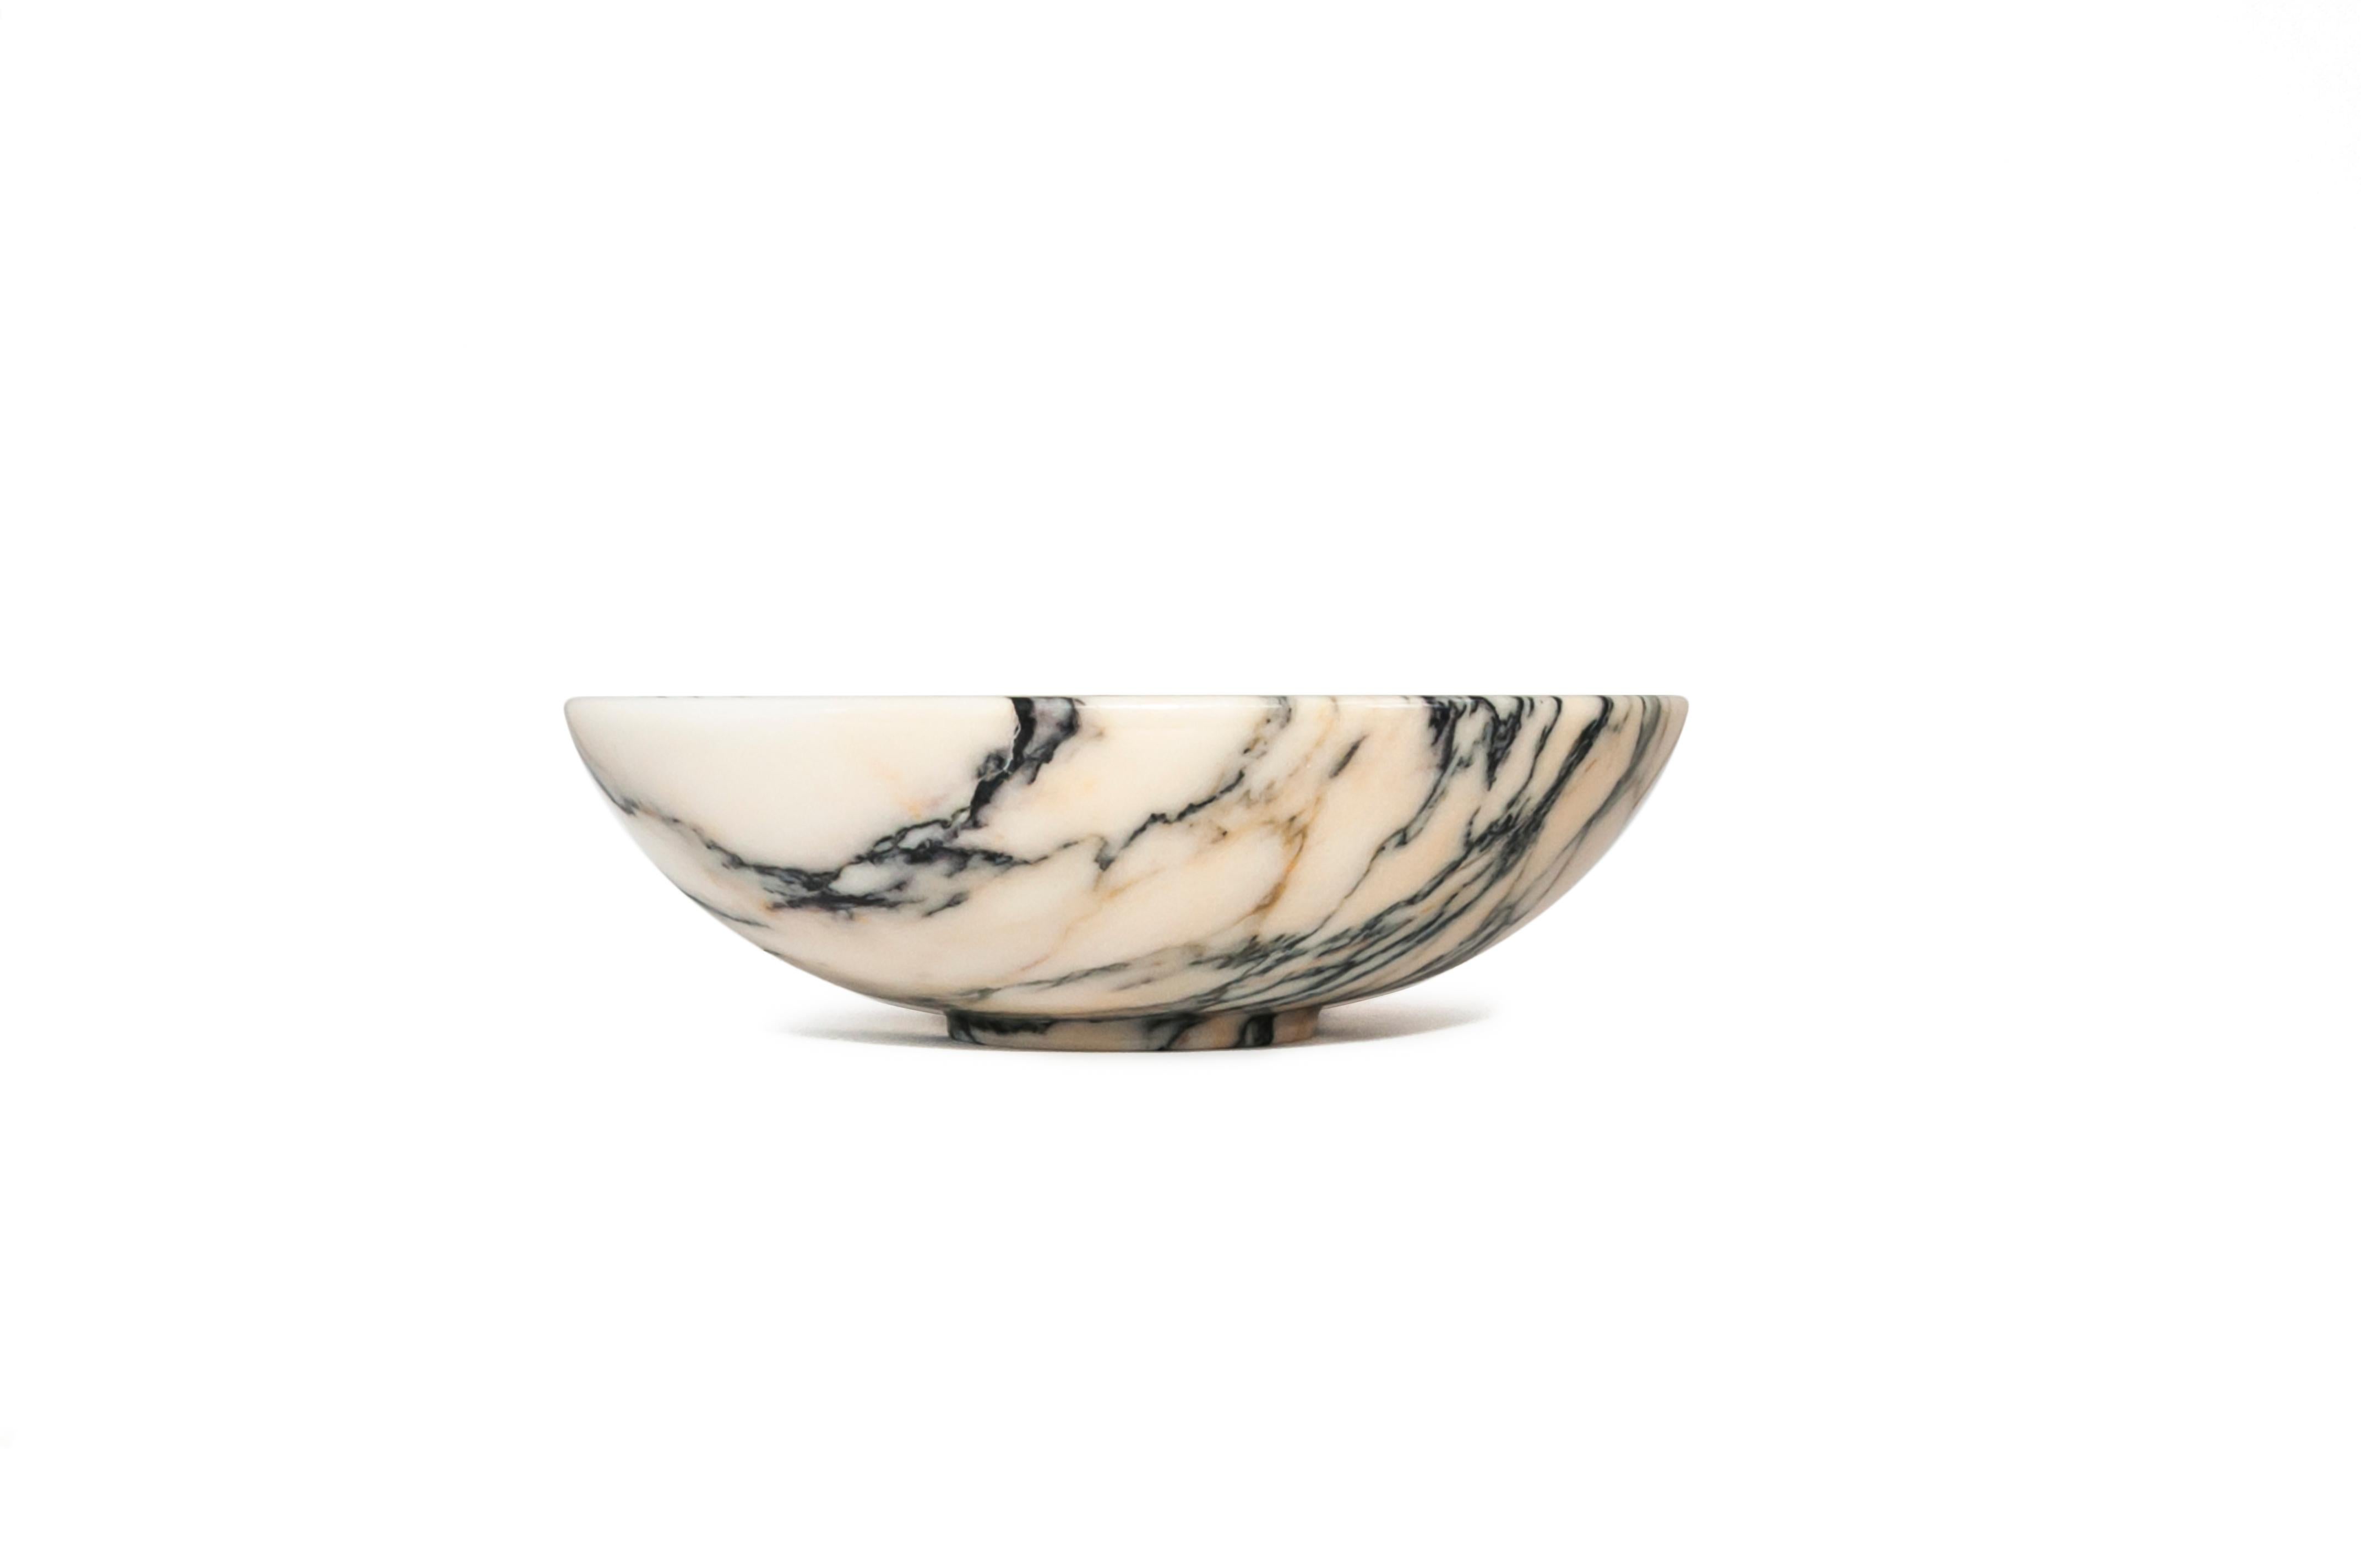 Bowl in Paonazzo marble, extracted and processed in Carrara, Italy. You have a 100% made in Italy product.
It is ideal for fruit and to present food.
Each piece is in a way unique (every marble block is different in veins and shades) and handmade by